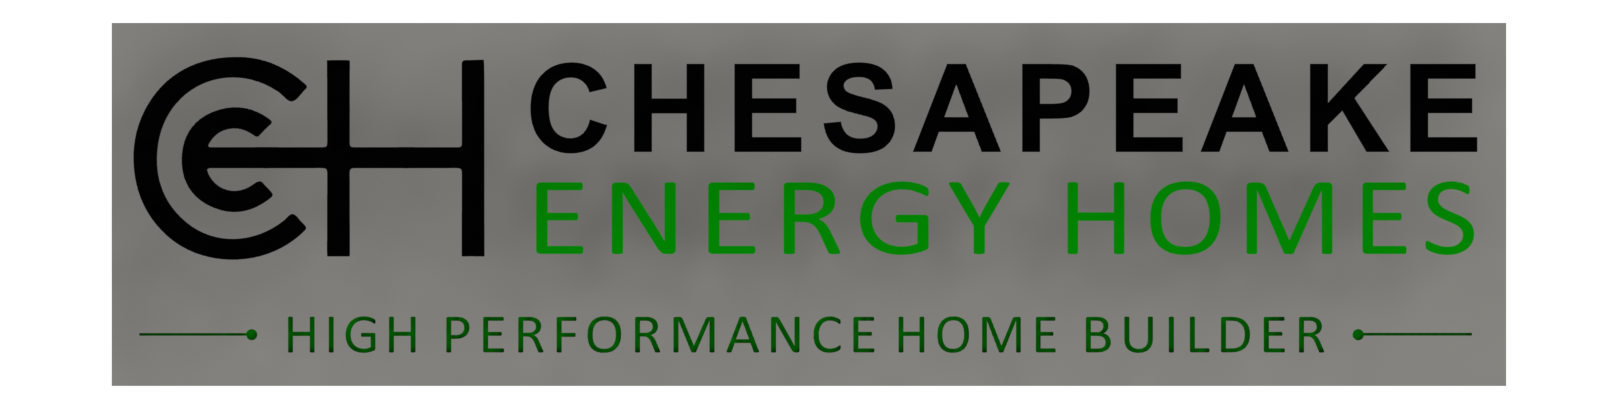 Chesapeake Energy Homes - Front.png